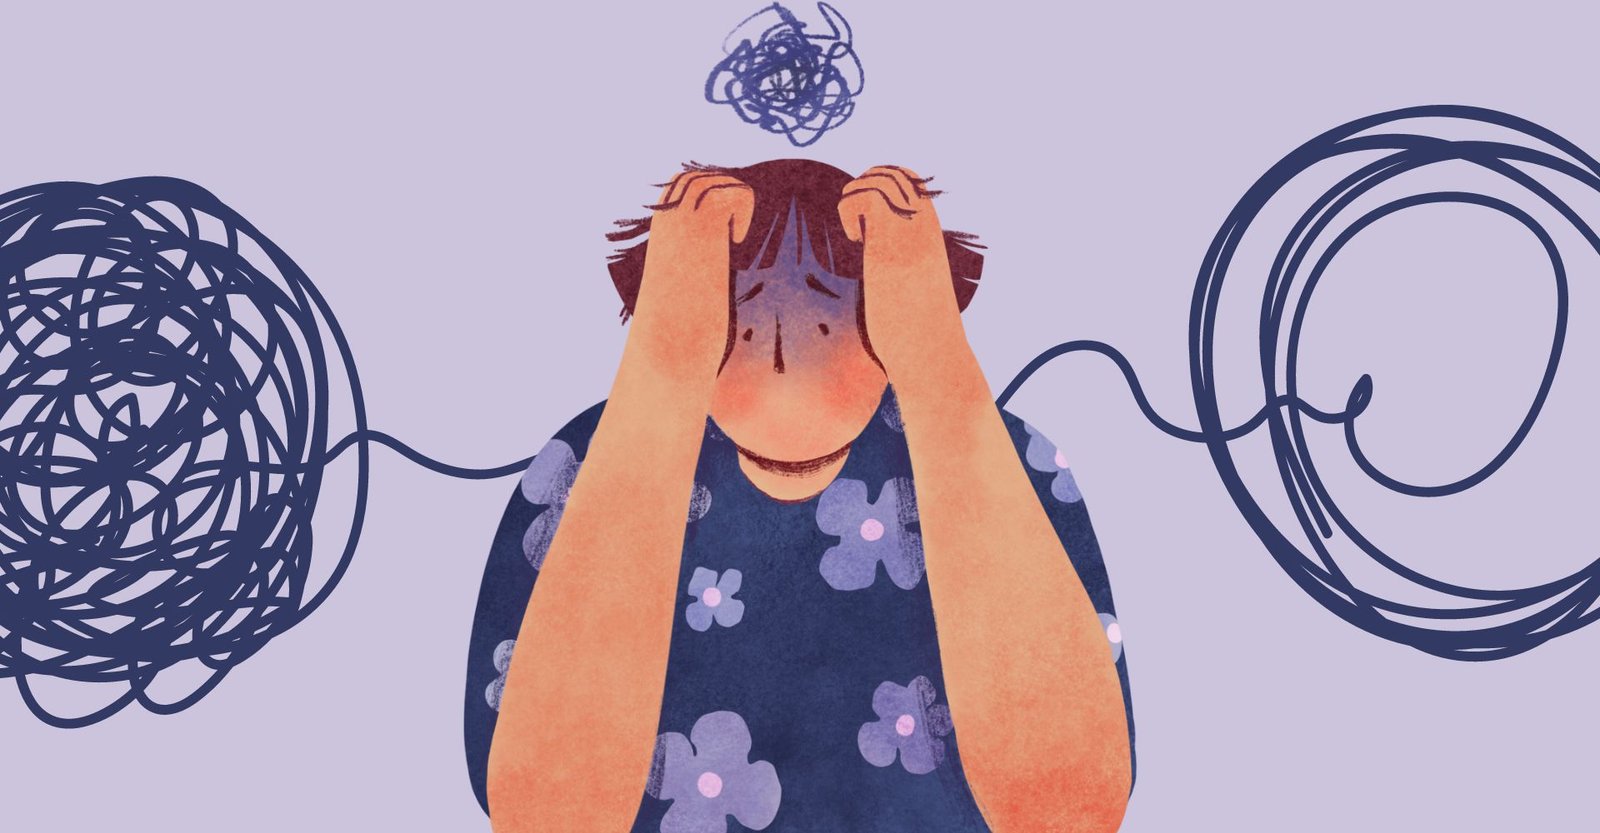 Cartoon of a stressed person clutching their hair with anxiety surrounding them.